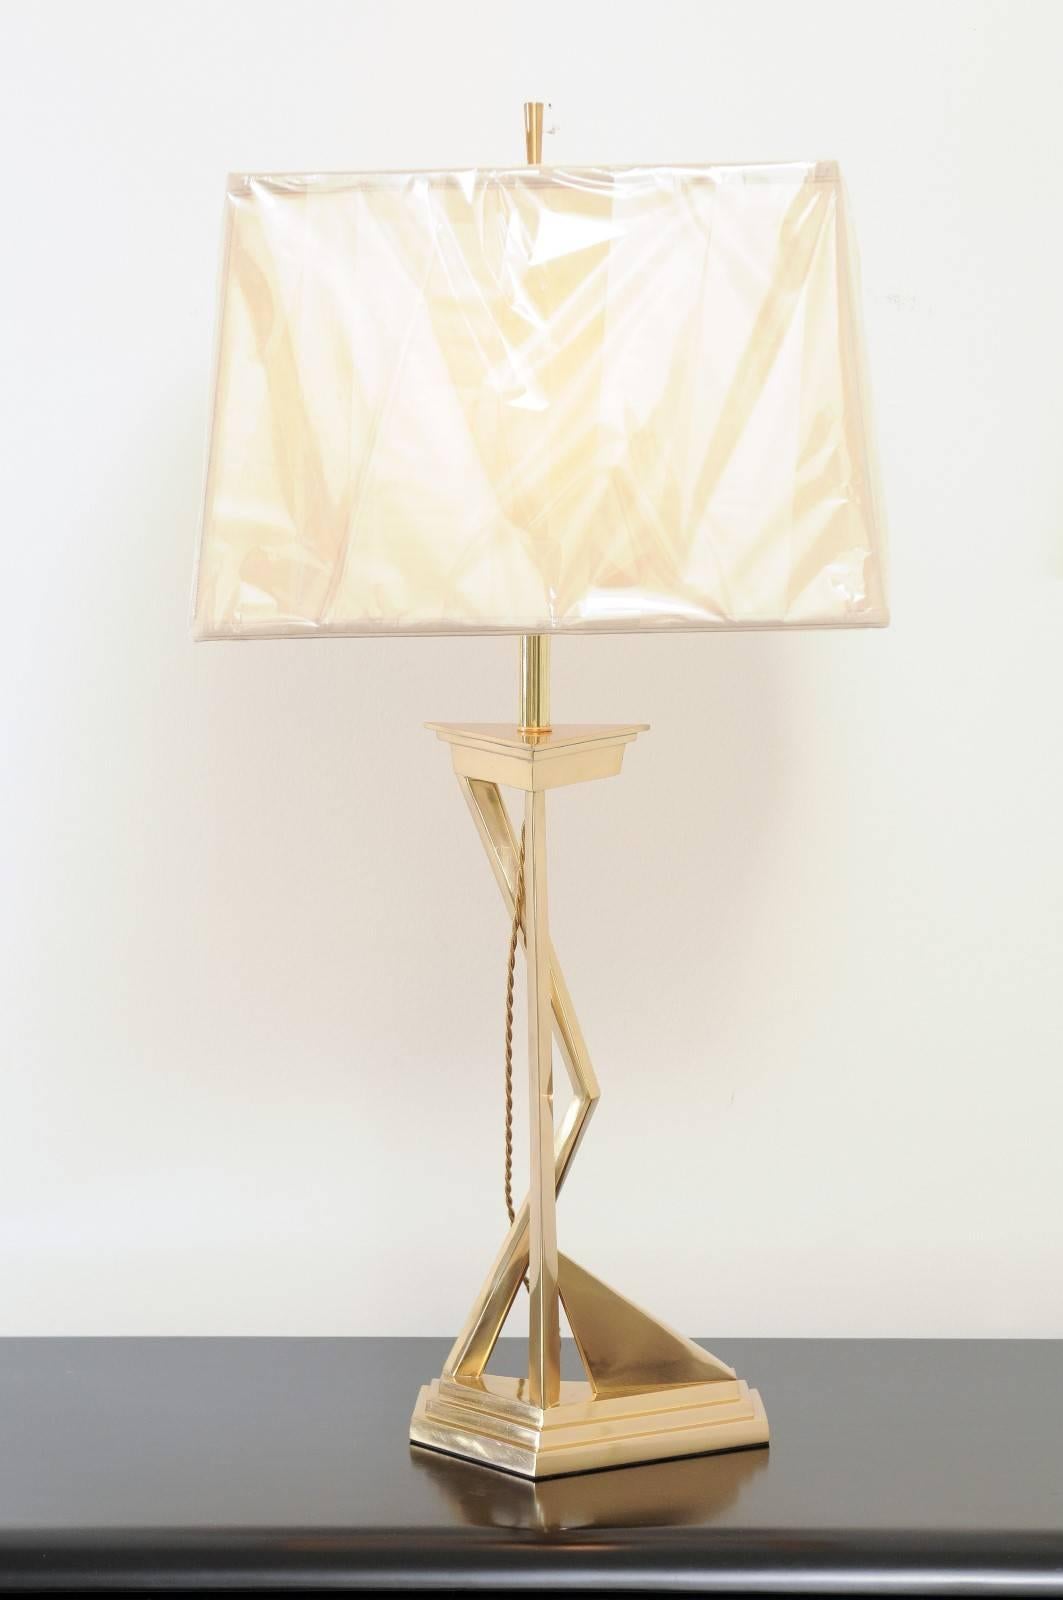 Exquisite Pair of Modern Brass Lamps in the Style of Parzinger, circa 1960 For Sale 2